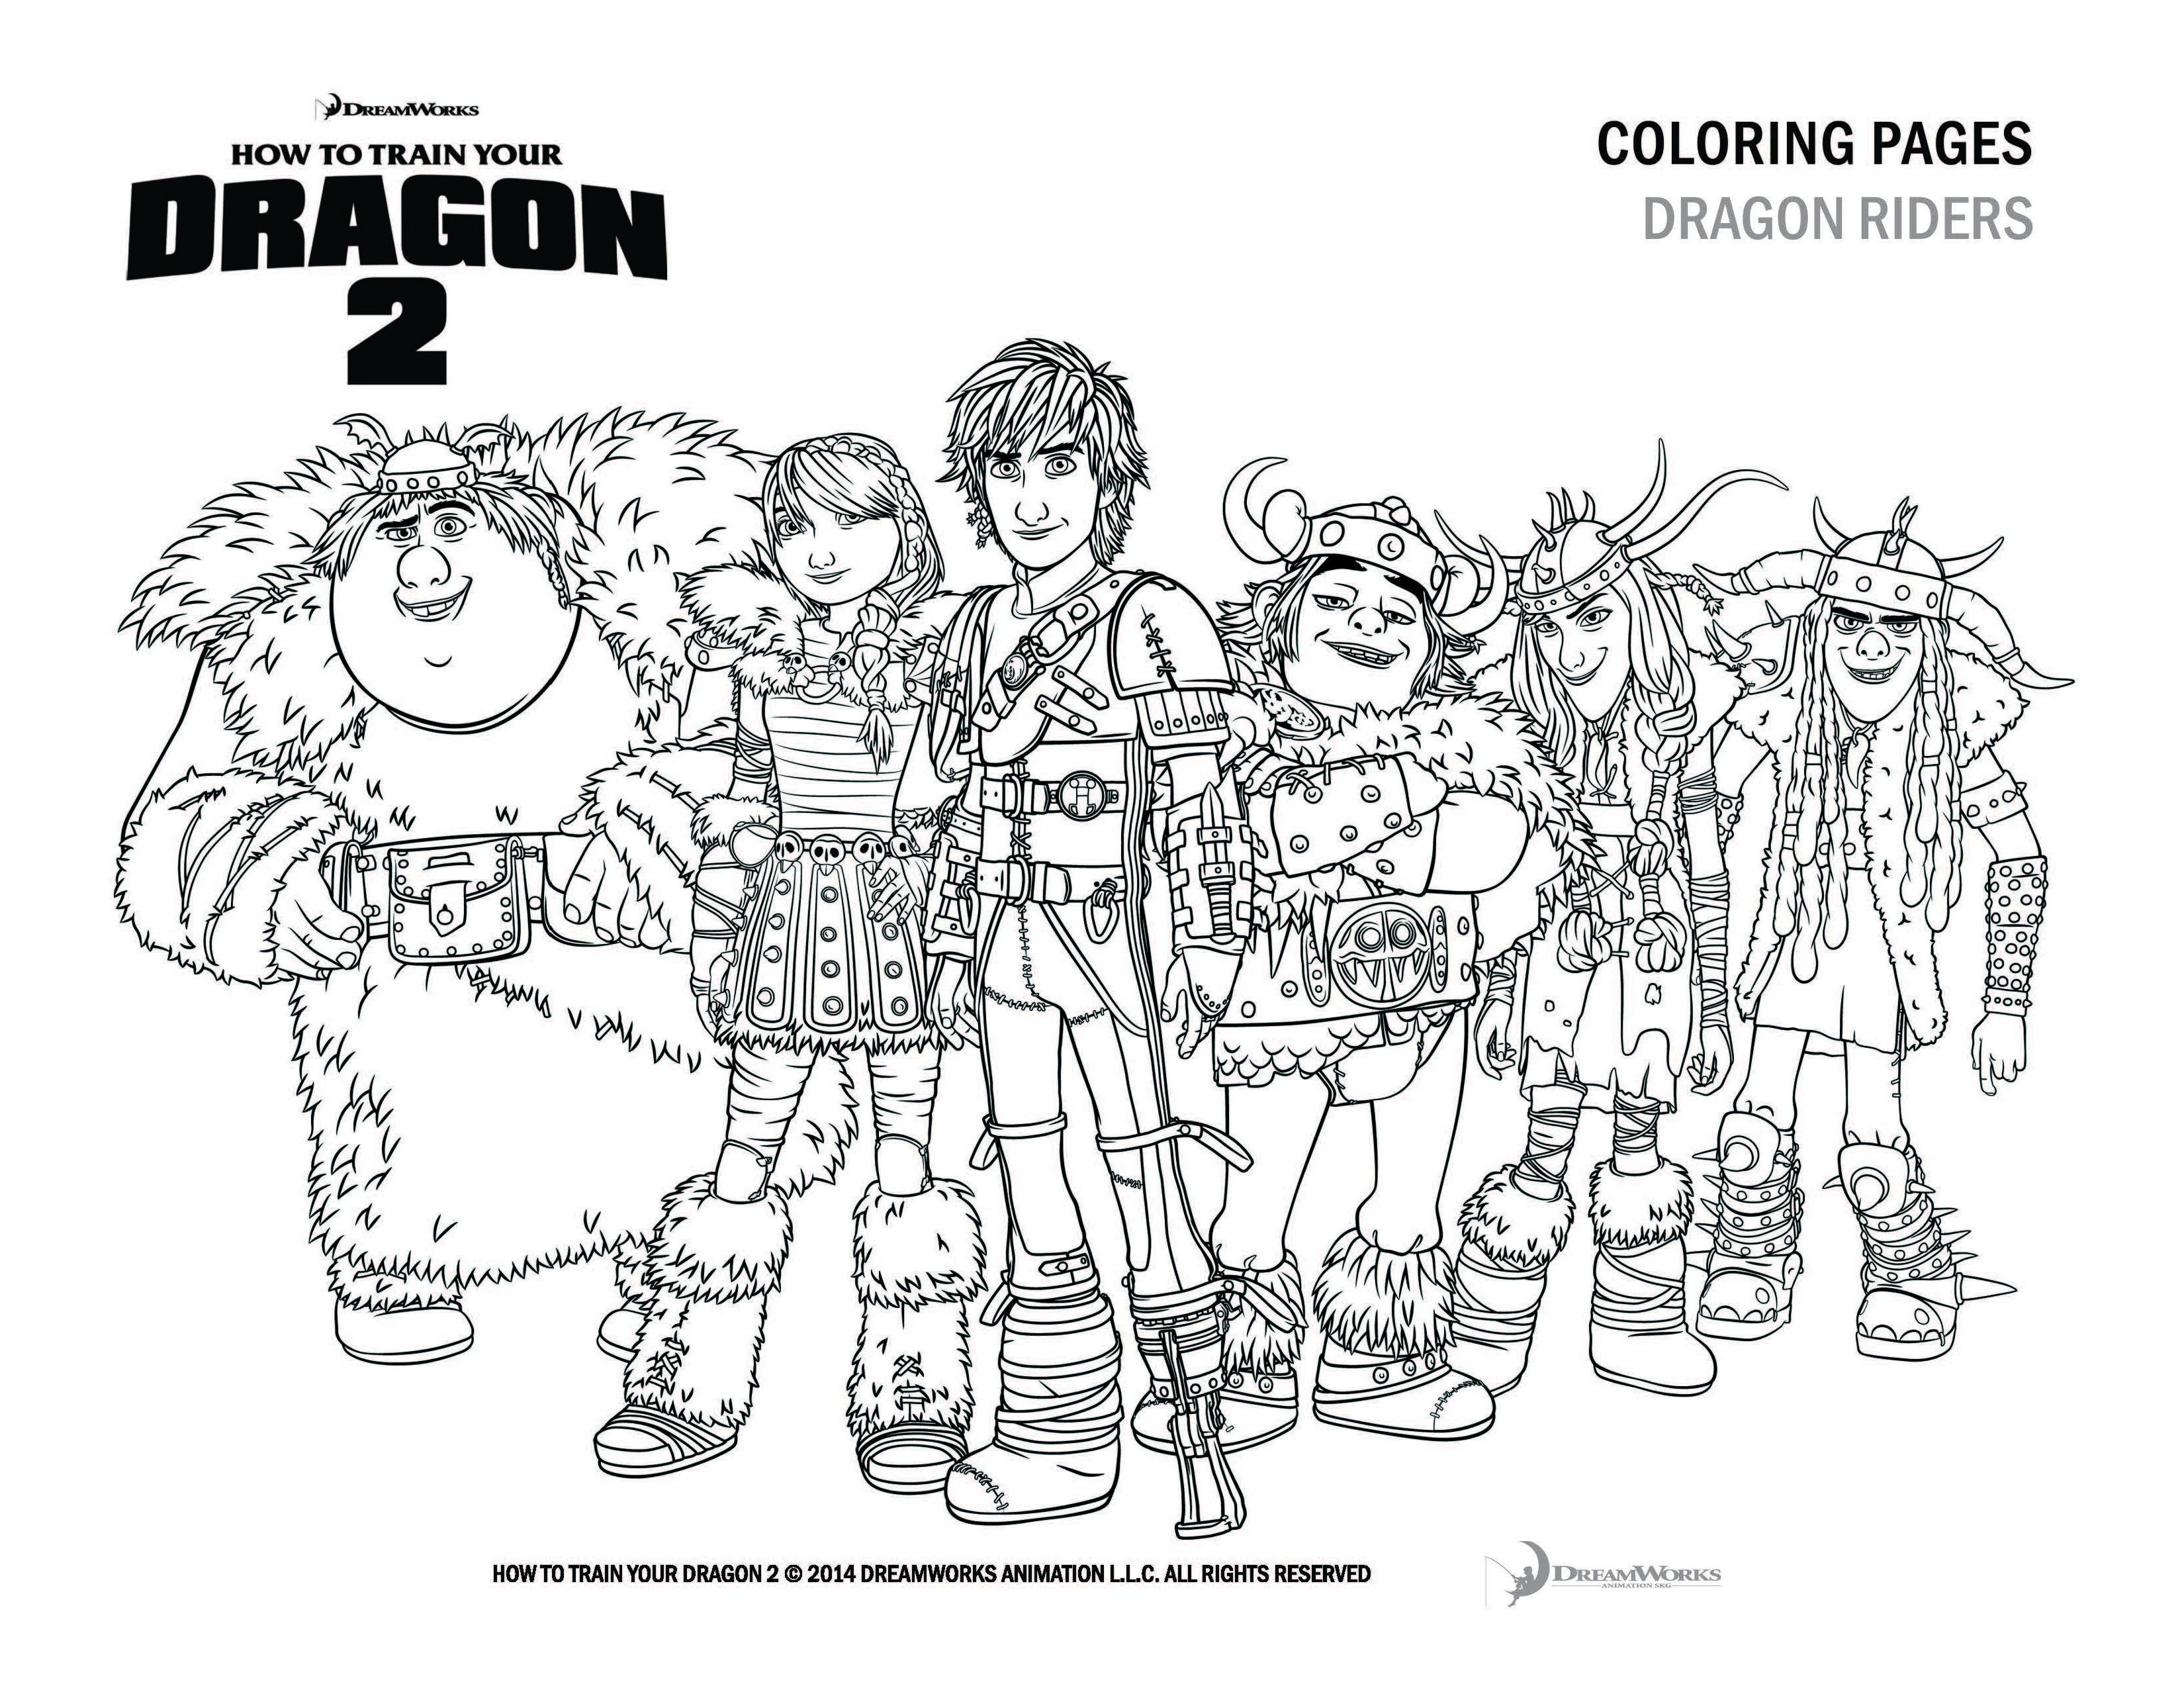 How to Train Your Dragon 2 coloring pages and activity sheets